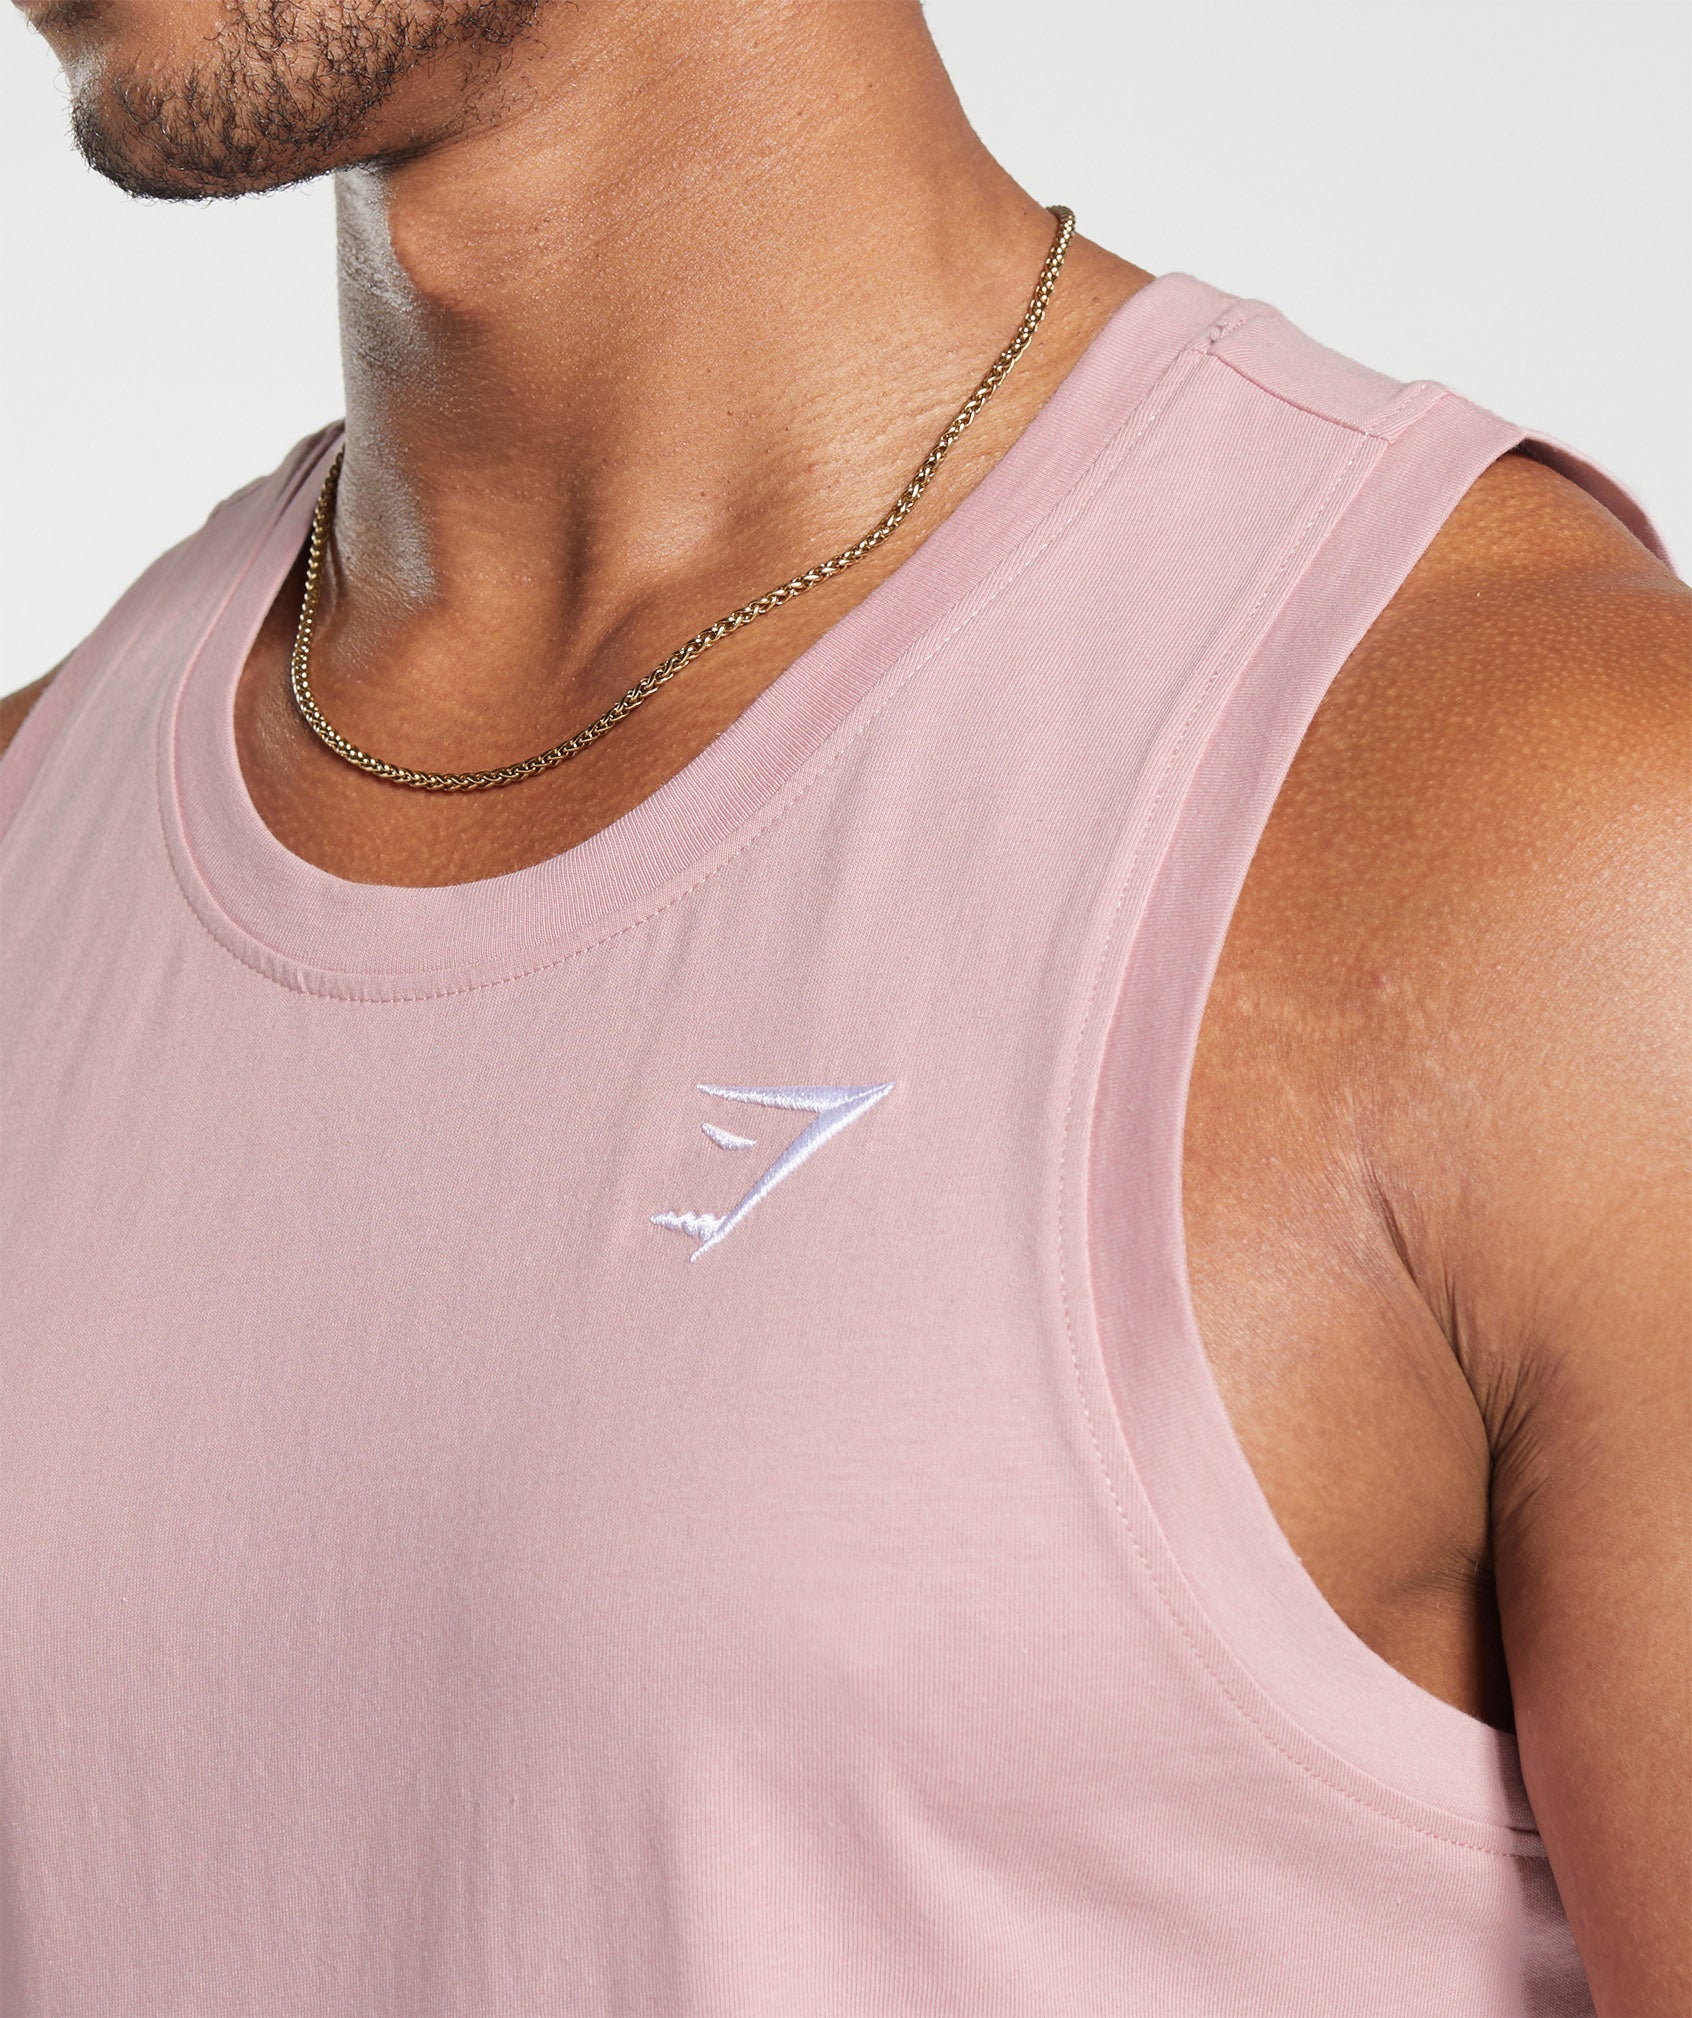 Crest Tank in Light Pink - view 5